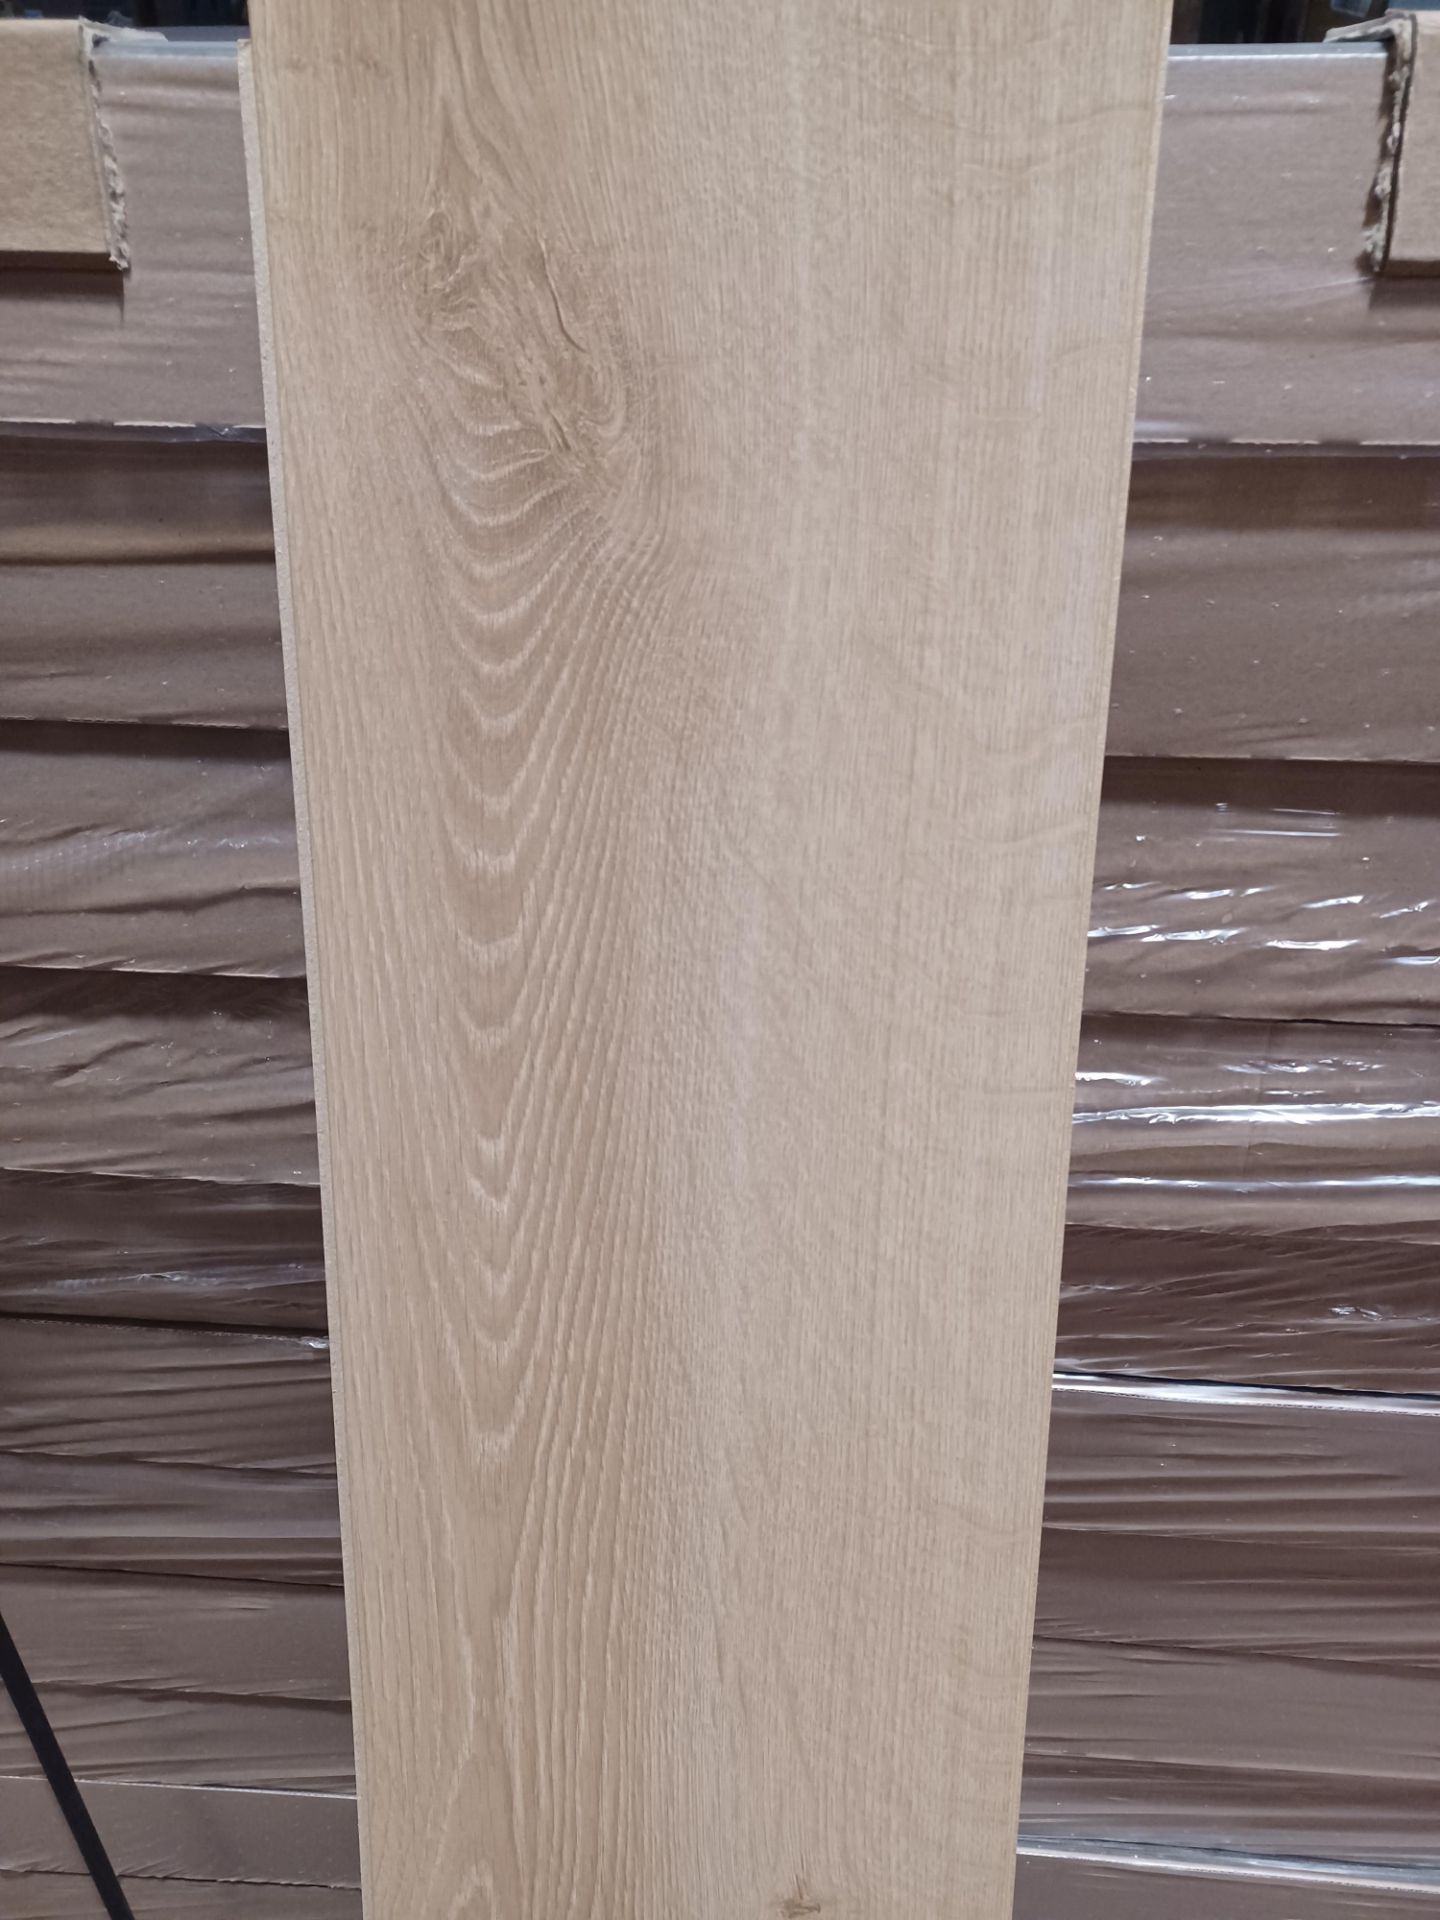 PALLET TO CONTAIN 10 X PACKS OF MALTON NATURAL OAK EFFECT LAMINATE FLOORING. EACH PACK CONTAINS 1. - Image 2 of 2